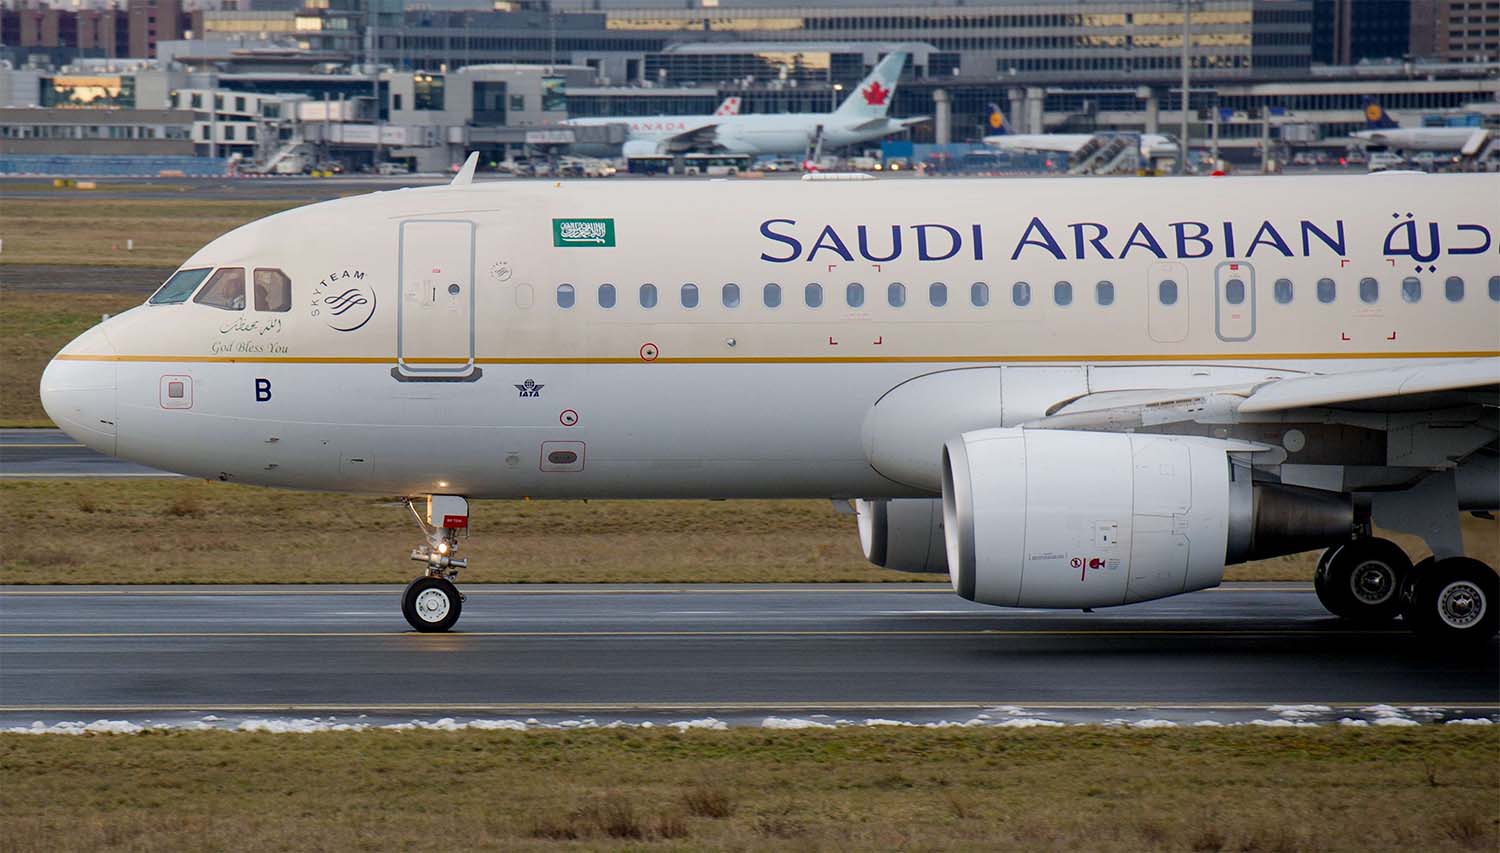 Saudia's fleet of 144 aircraft already includes A321, 777 and 787 jets